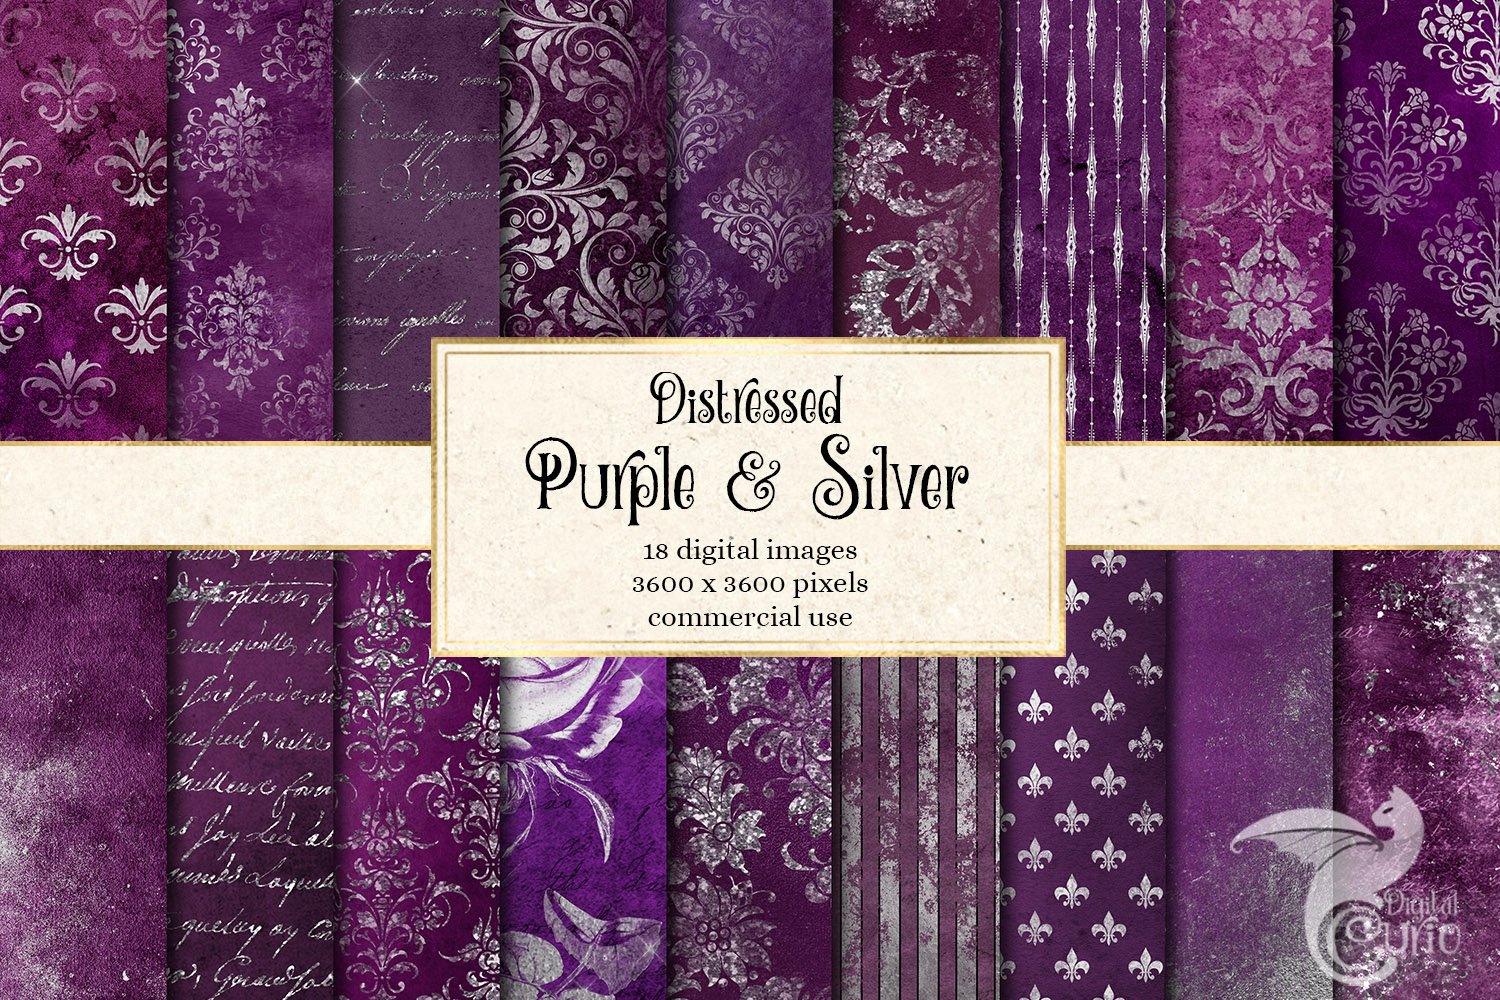 Distressed Purple & Silver cover image.